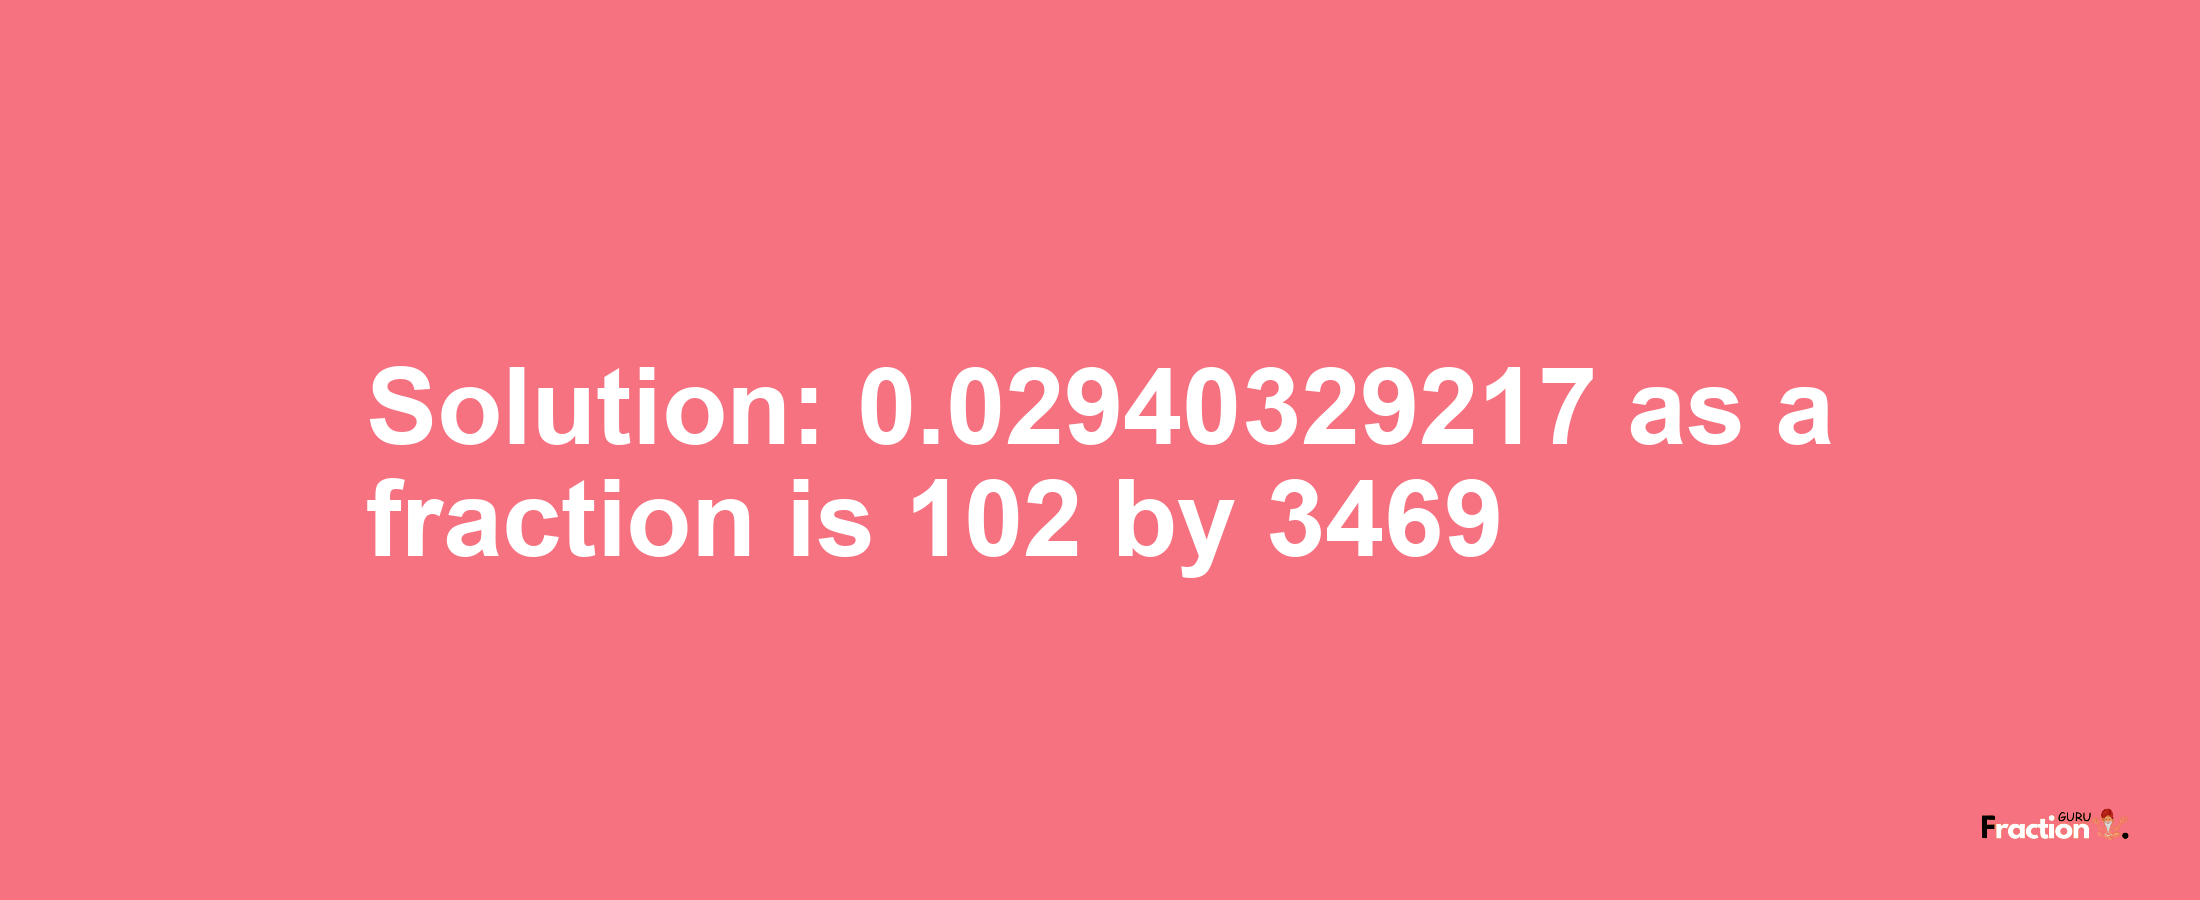 Solution:0.02940329217 as a fraction is 102/3469